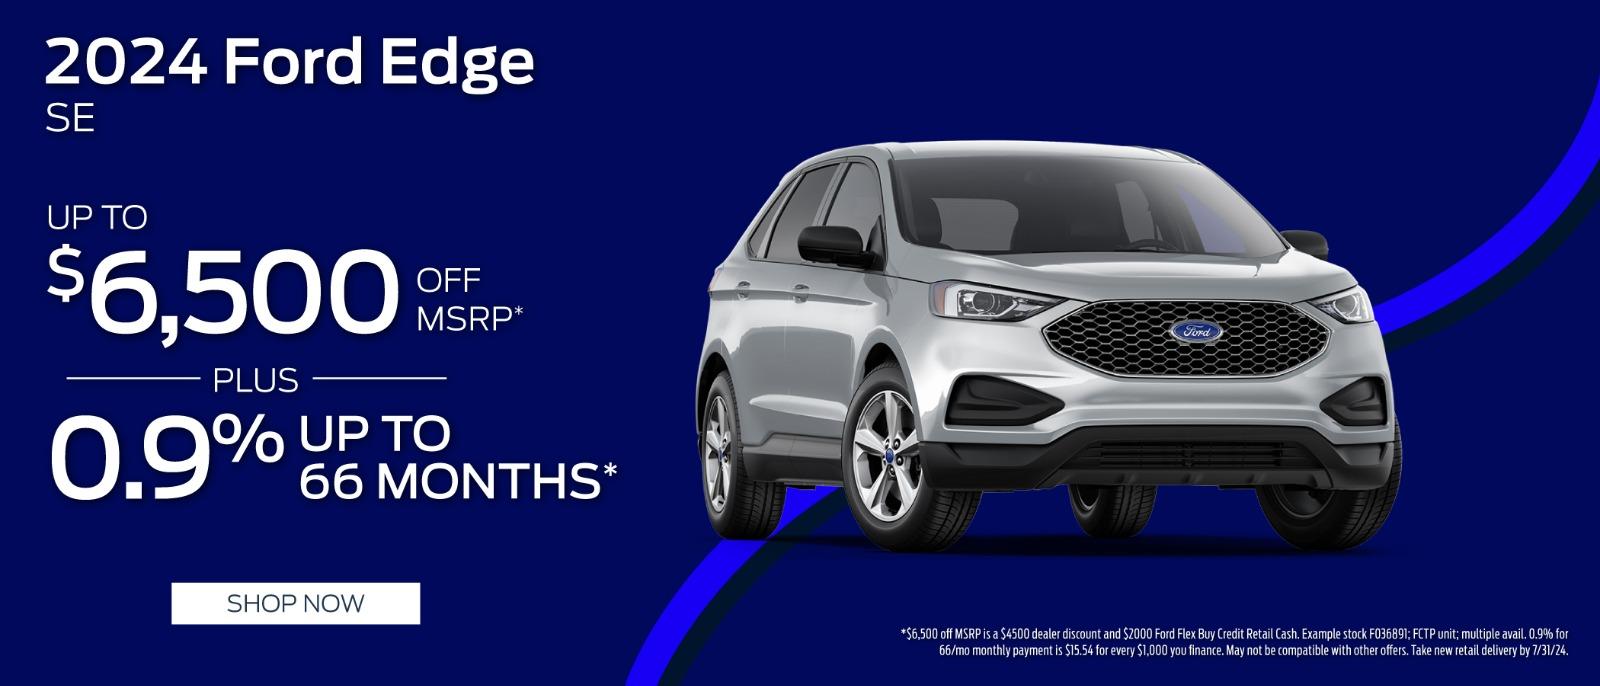 2024 Ford Edge $6,500 off MSRP plus .9% up to 66 months